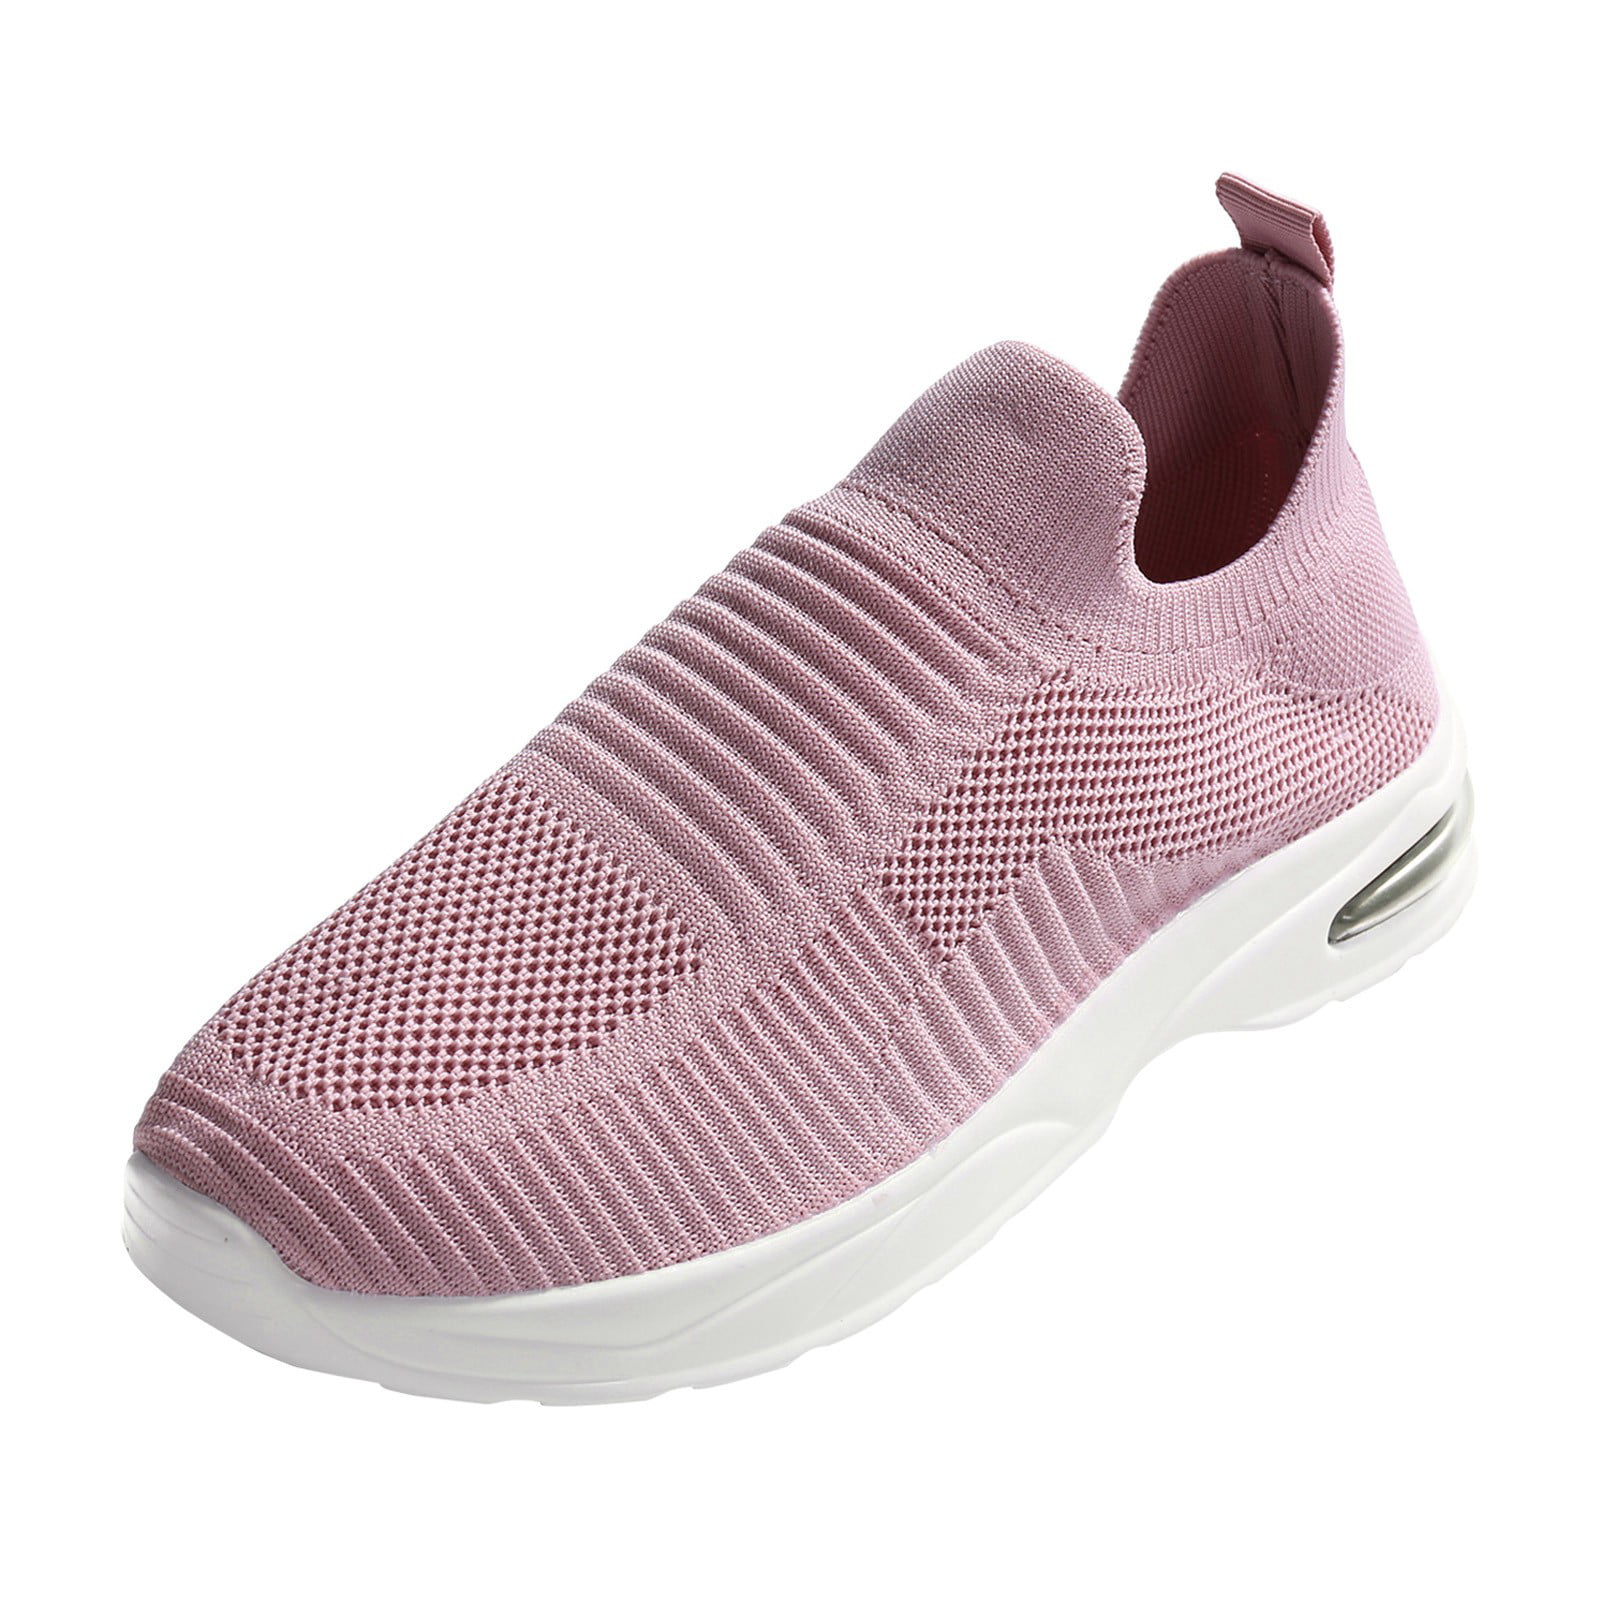 ANKIDS Woven Slip-on Breathable Running Shoes Unisex Sneakers 